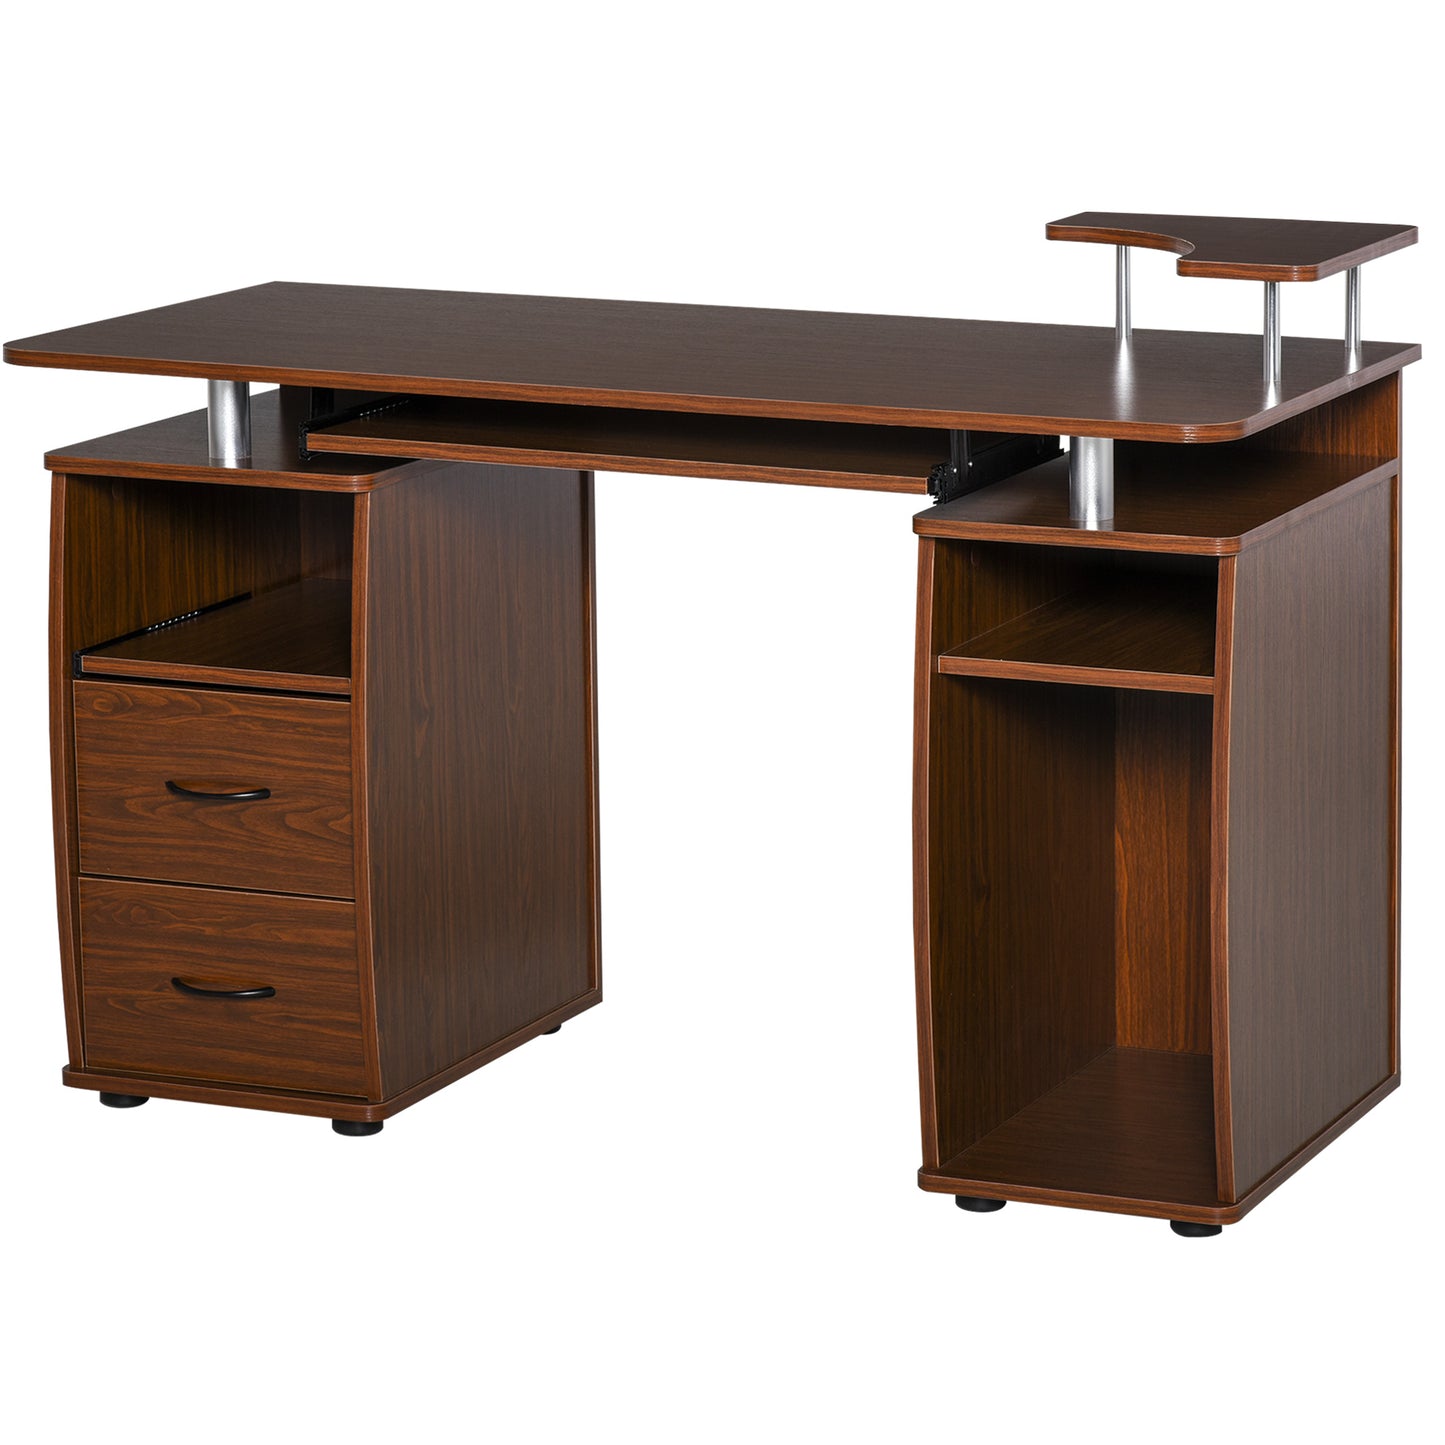 HOMCOM Computer Desk Office PC Table Workstation with  Keyboard Tray, Drawers, Brown